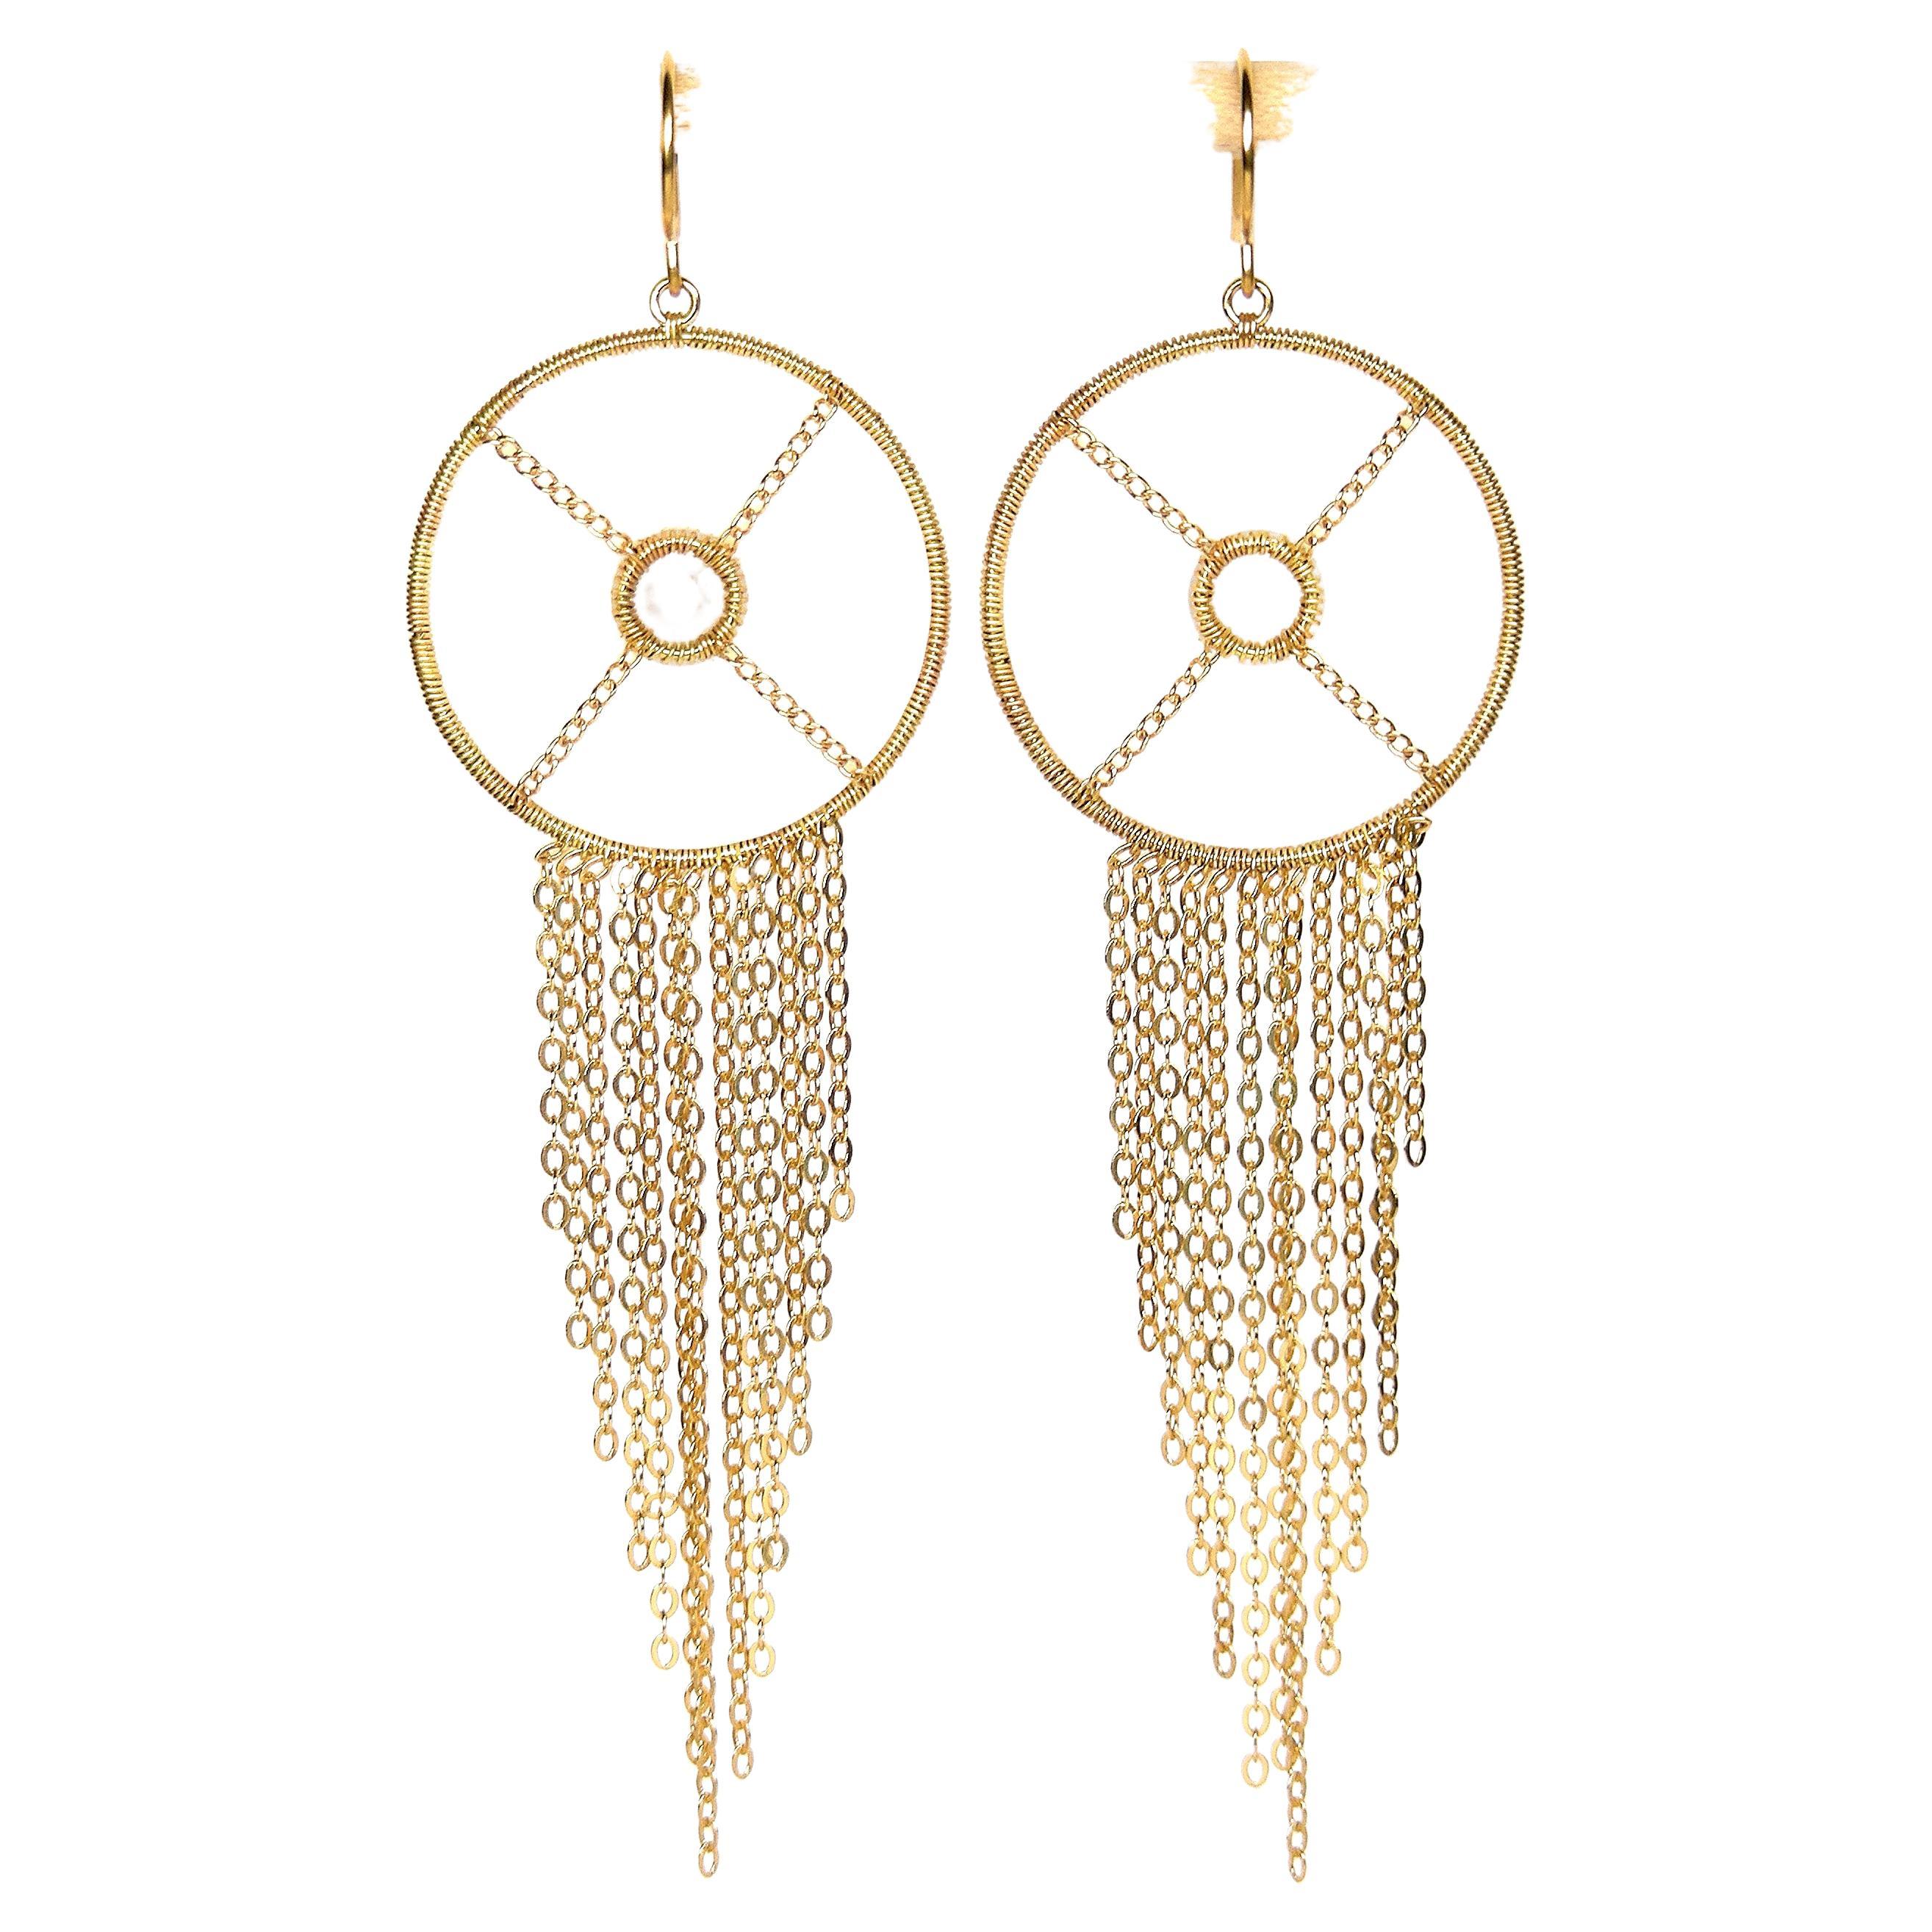 Summer Splash is a collection of easy to wear, fashion oriented hoop earrings to wear with lightness, chic and glam only this pieces for this collection 
Hoop 18k Gold Earrings with Clear Onyx Central Round Motif
They come in 6 variations of